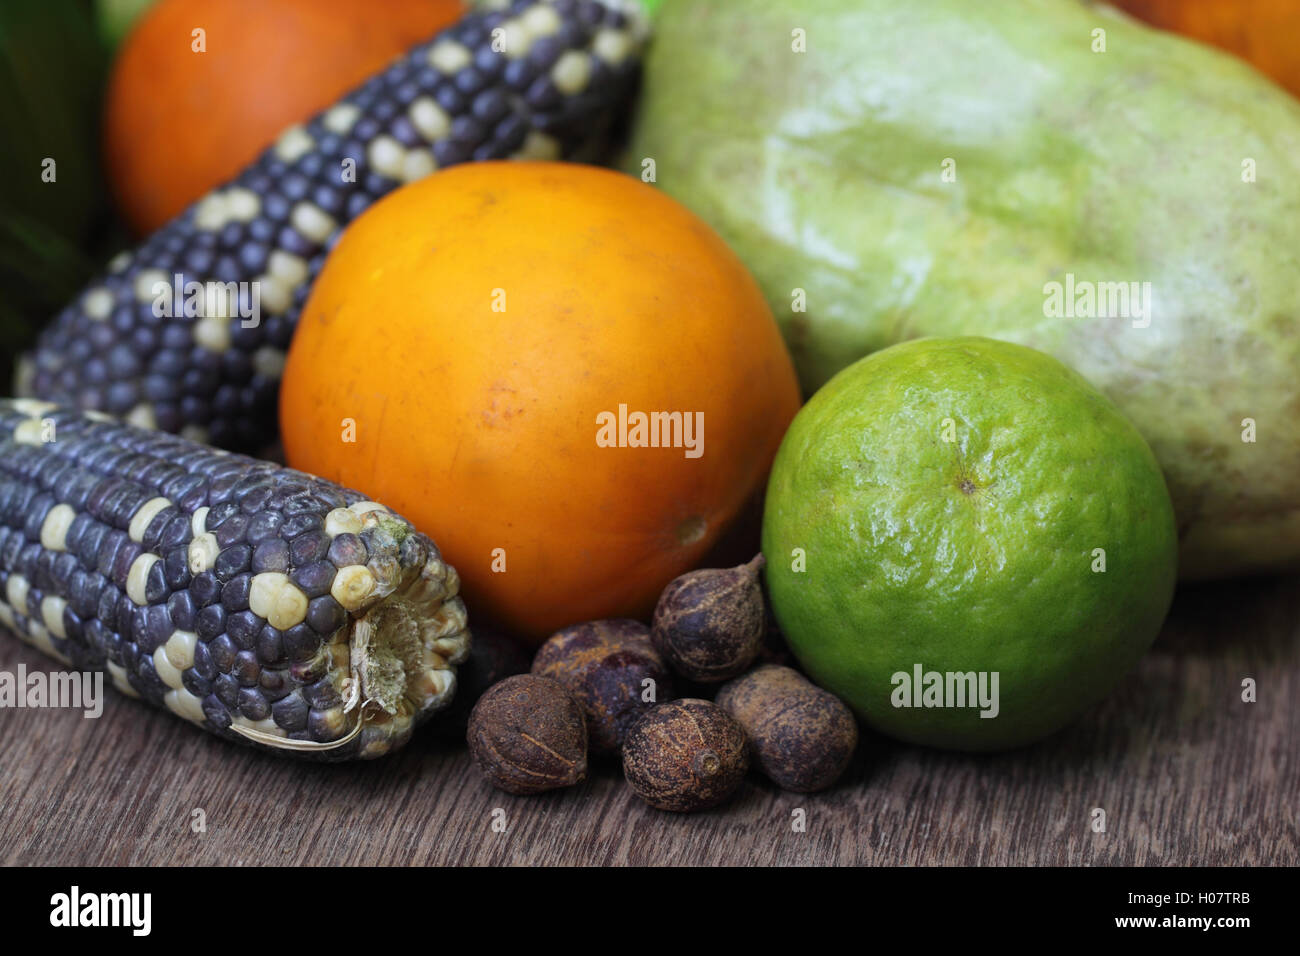 Fruits and Vegetables Stock Photo